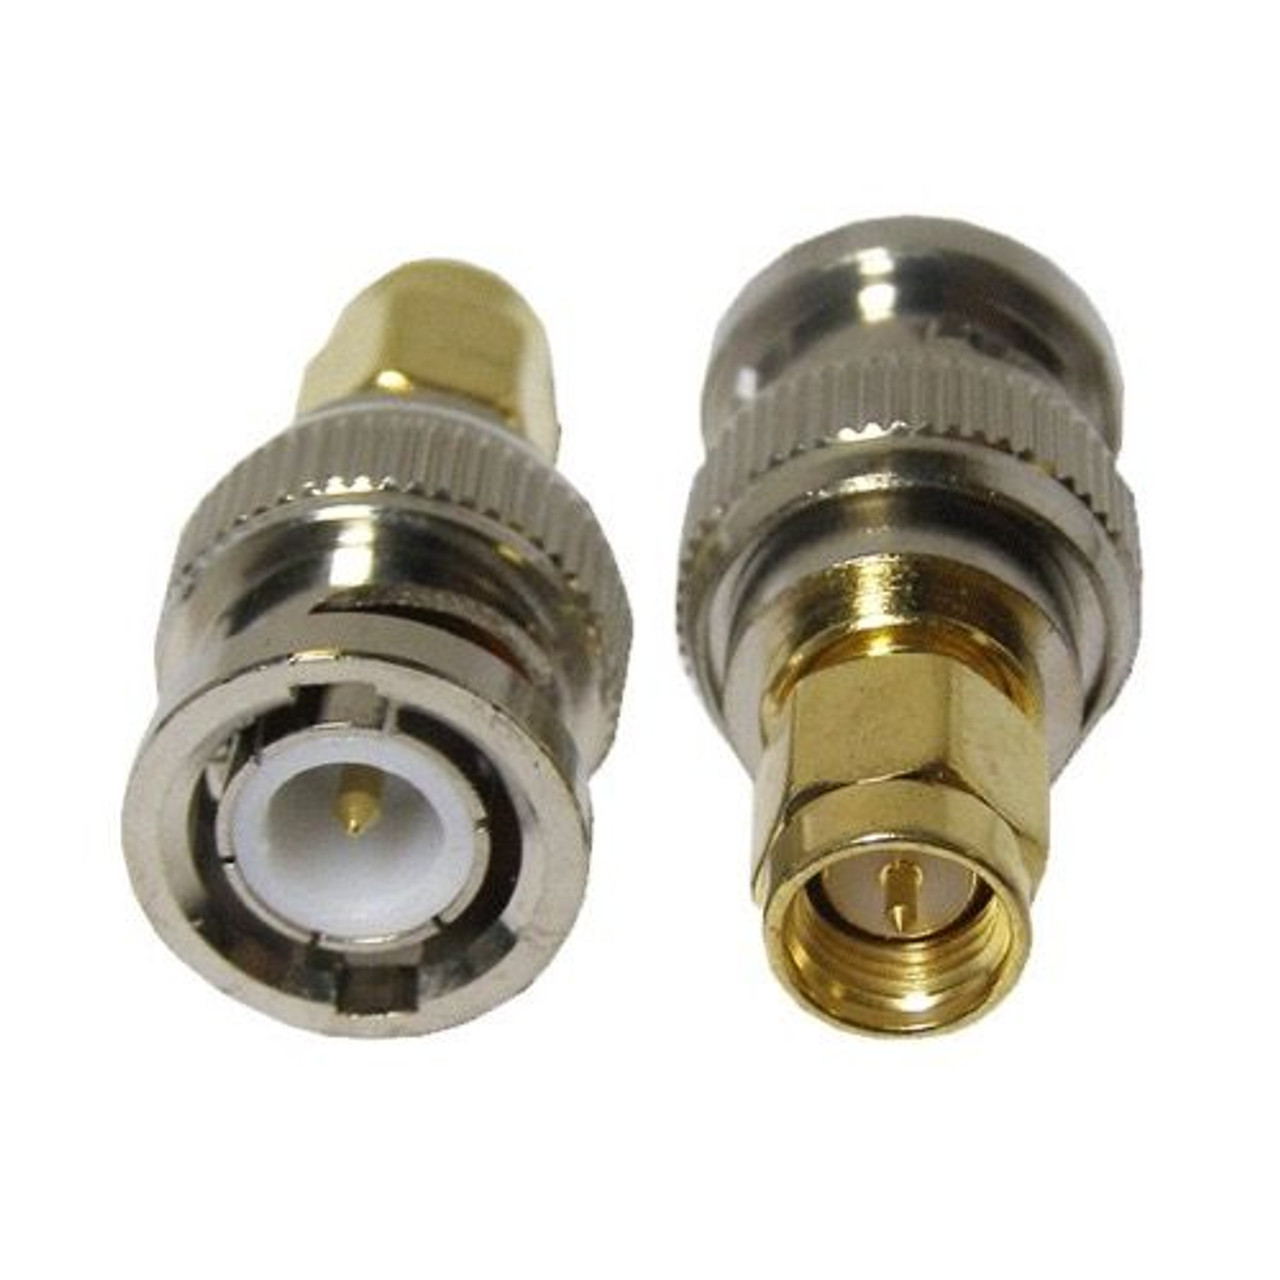 Eagle WF6028 SMA Male to BNC Male Adapter Gold Adapter Connector Gold Plated Contacts Commercial Grade Adapter Connector SMA Series Component Adapter